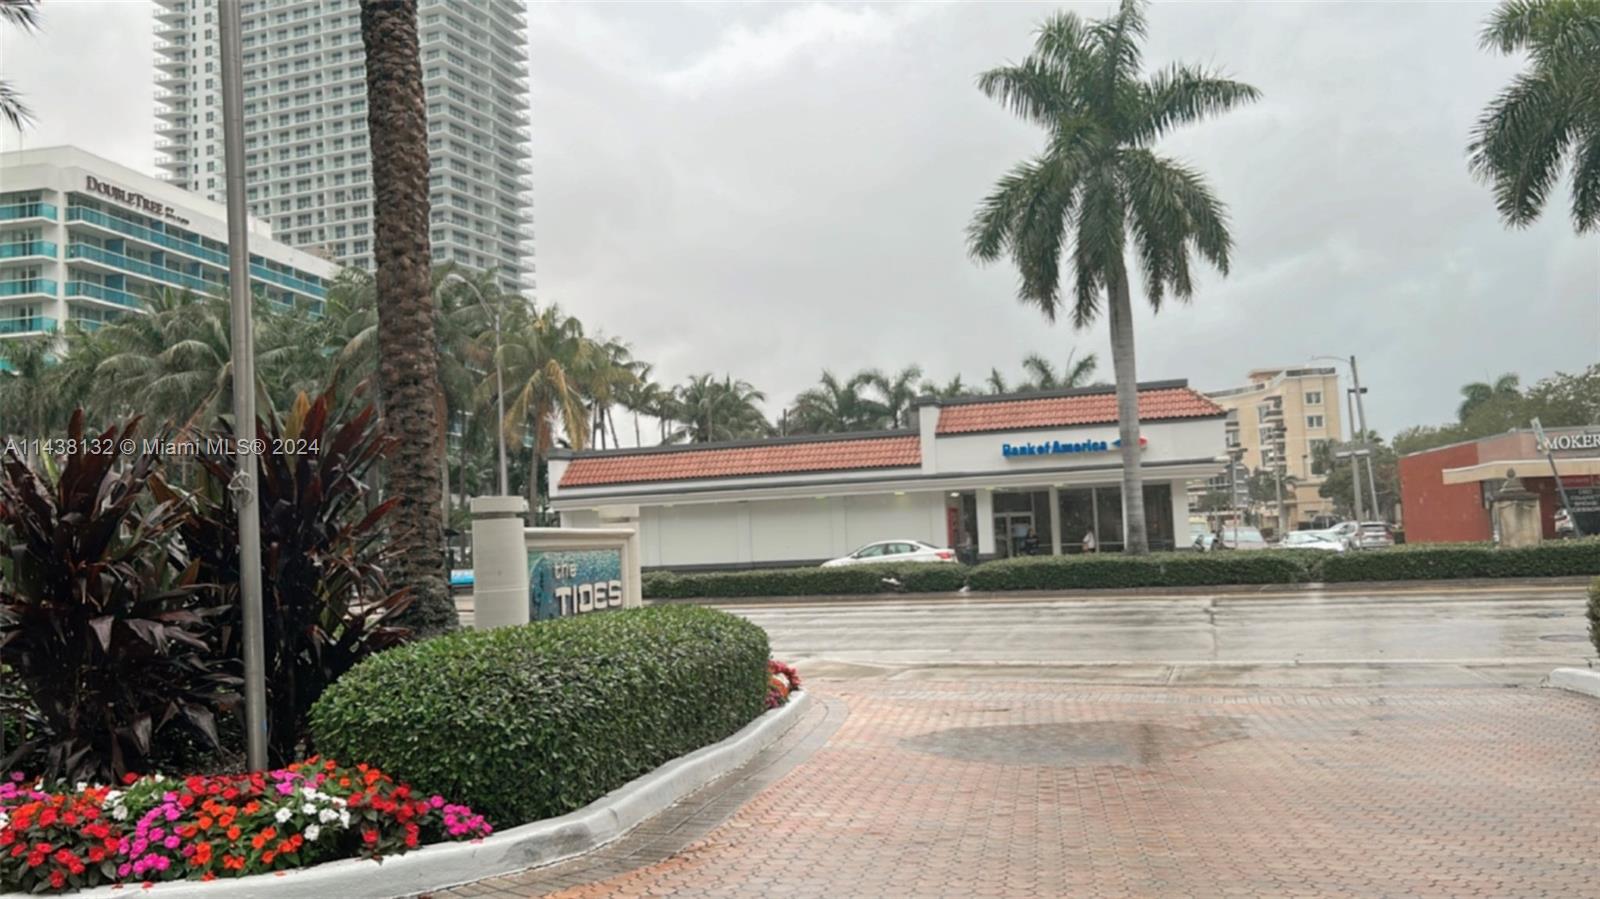 Residential, Hollywood, Florida image 14